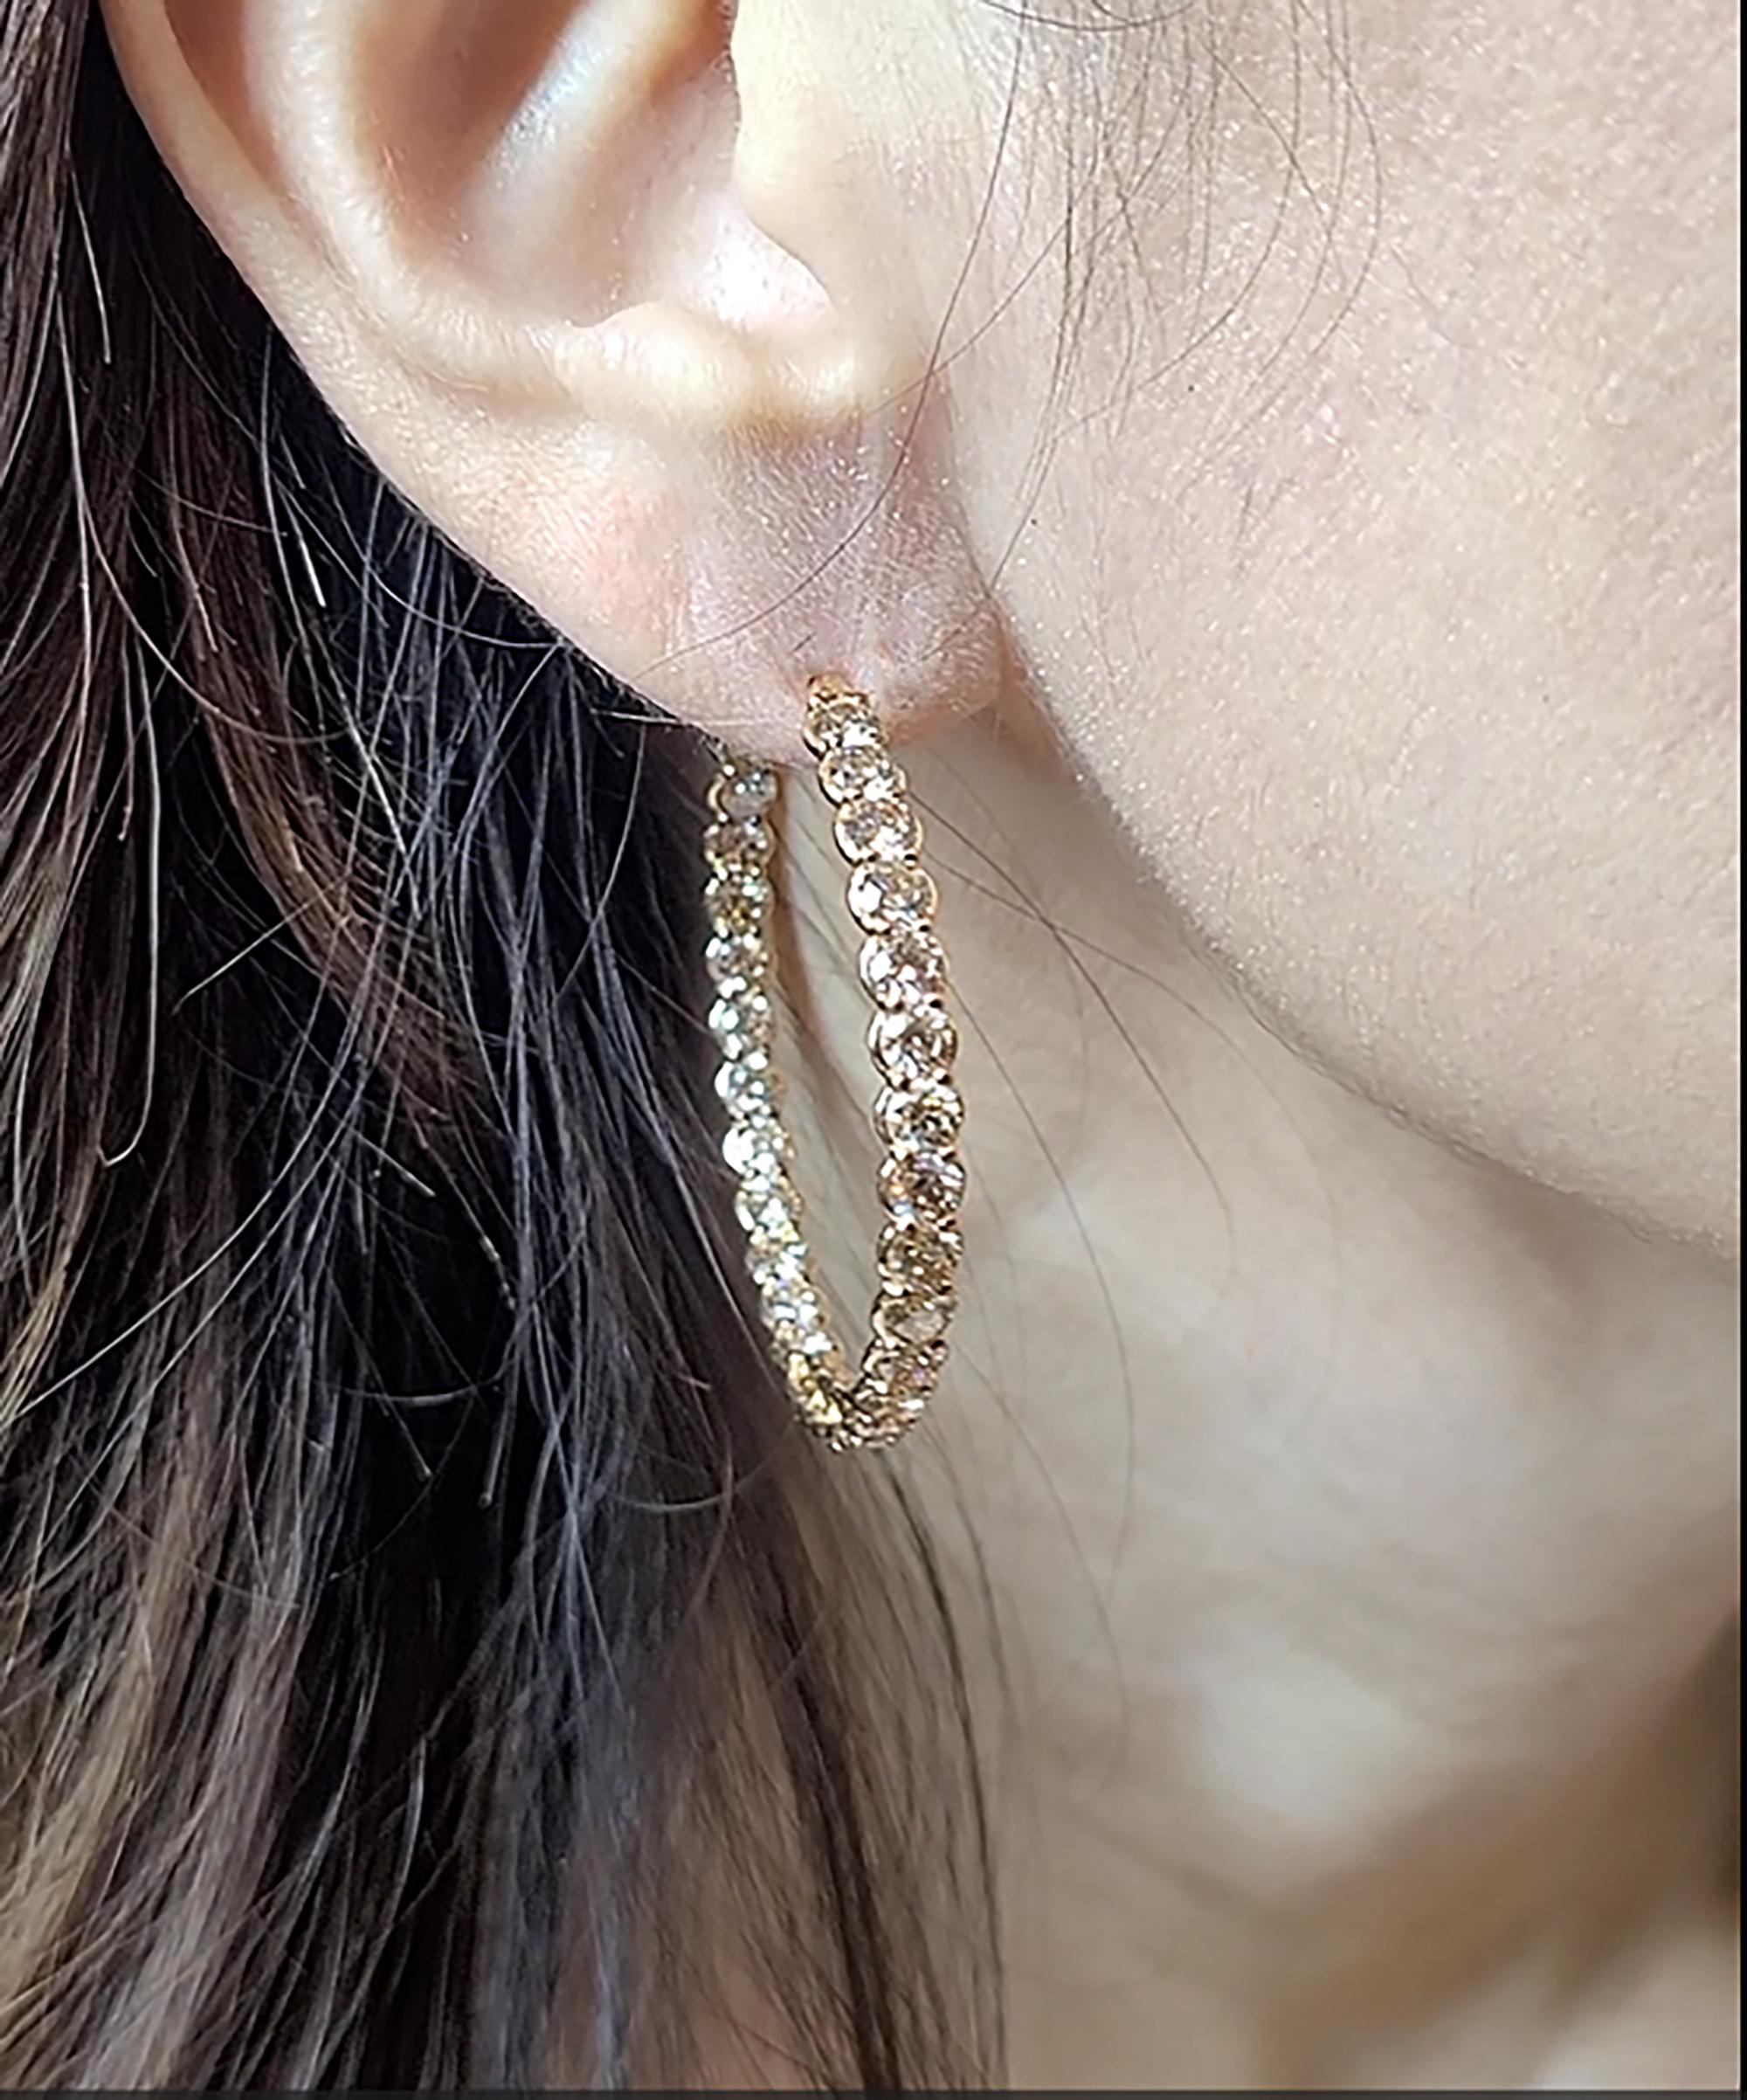 Introducing our stunning desk-to-event Diamond Hoop Earrings, the perfect addition to any jewelry collection. These earrings are crafted from 18k rose gold, giving them a warm and luxurious hue that complements the sparkling diamonds